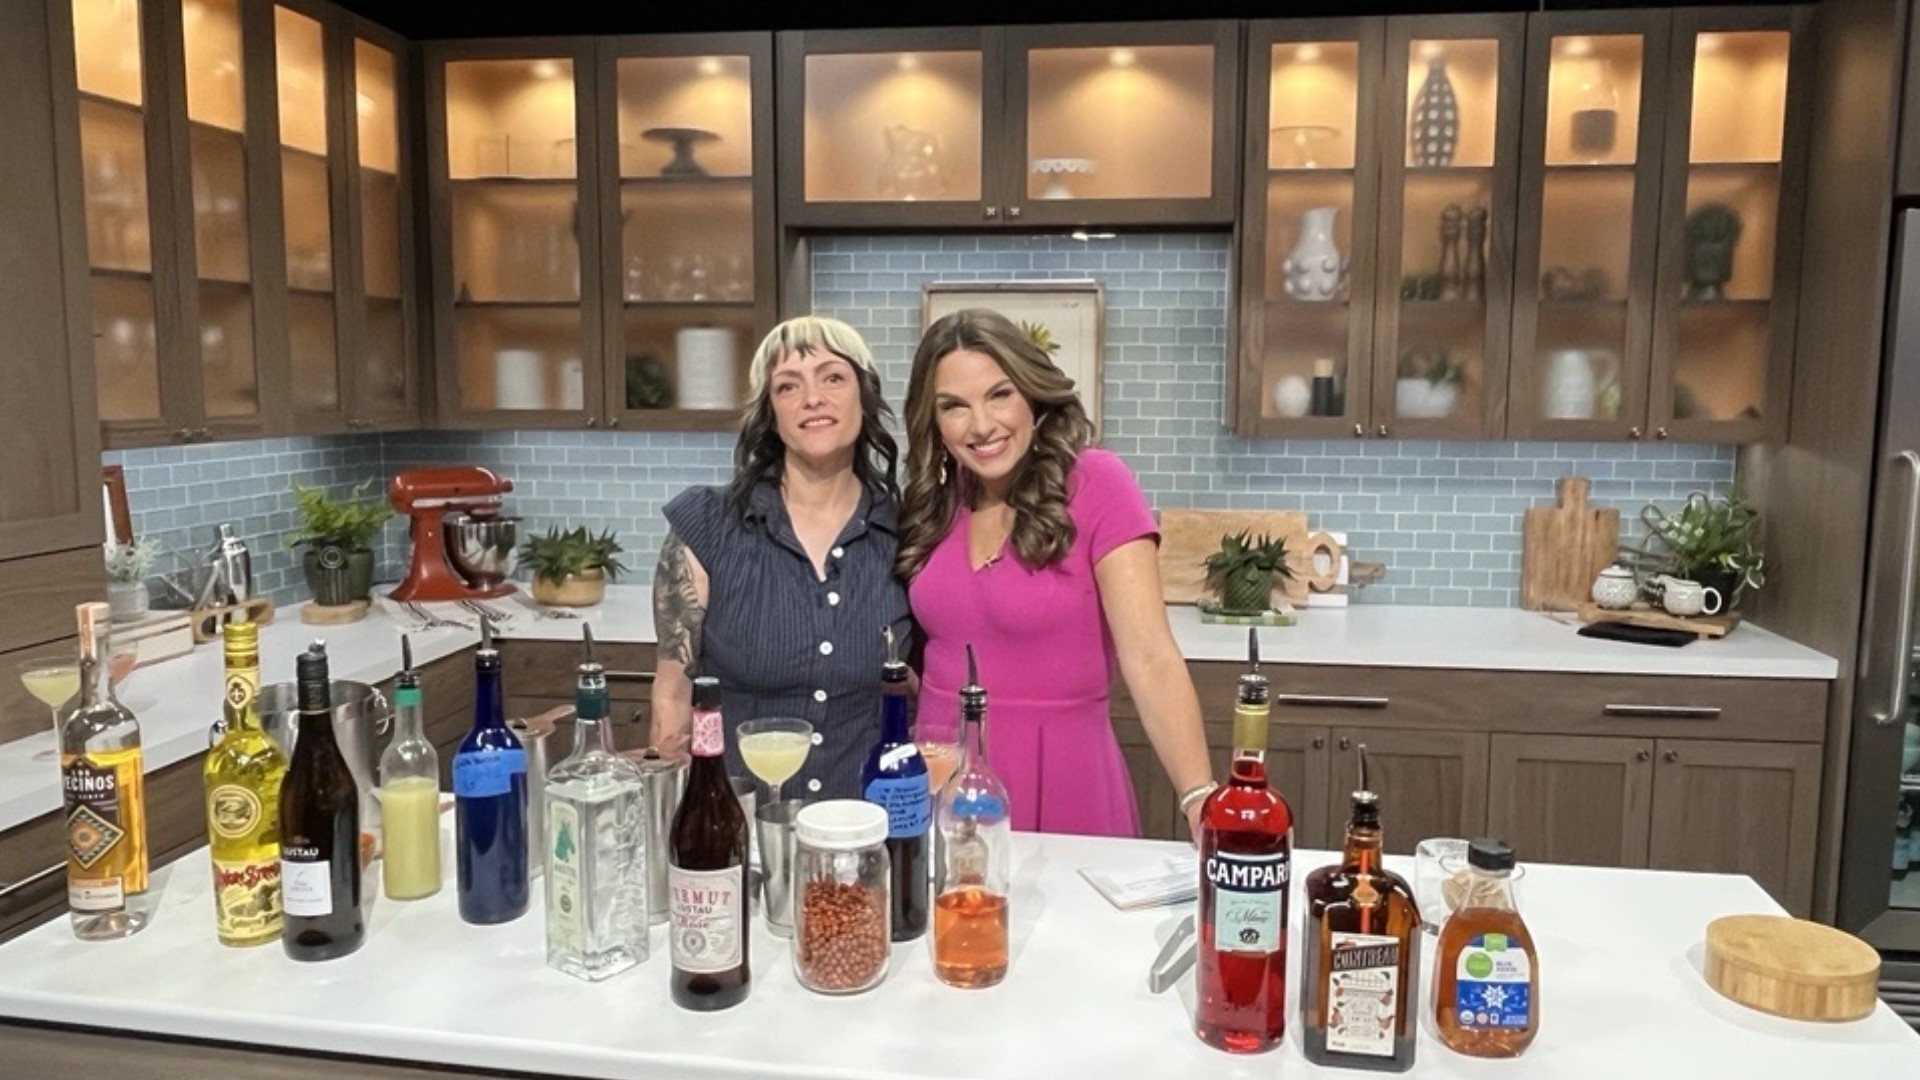 July 24th is National Tequila Day and Master Mixologist Sara Rosales from Lady Jaye has the perfect cocktail recipes.